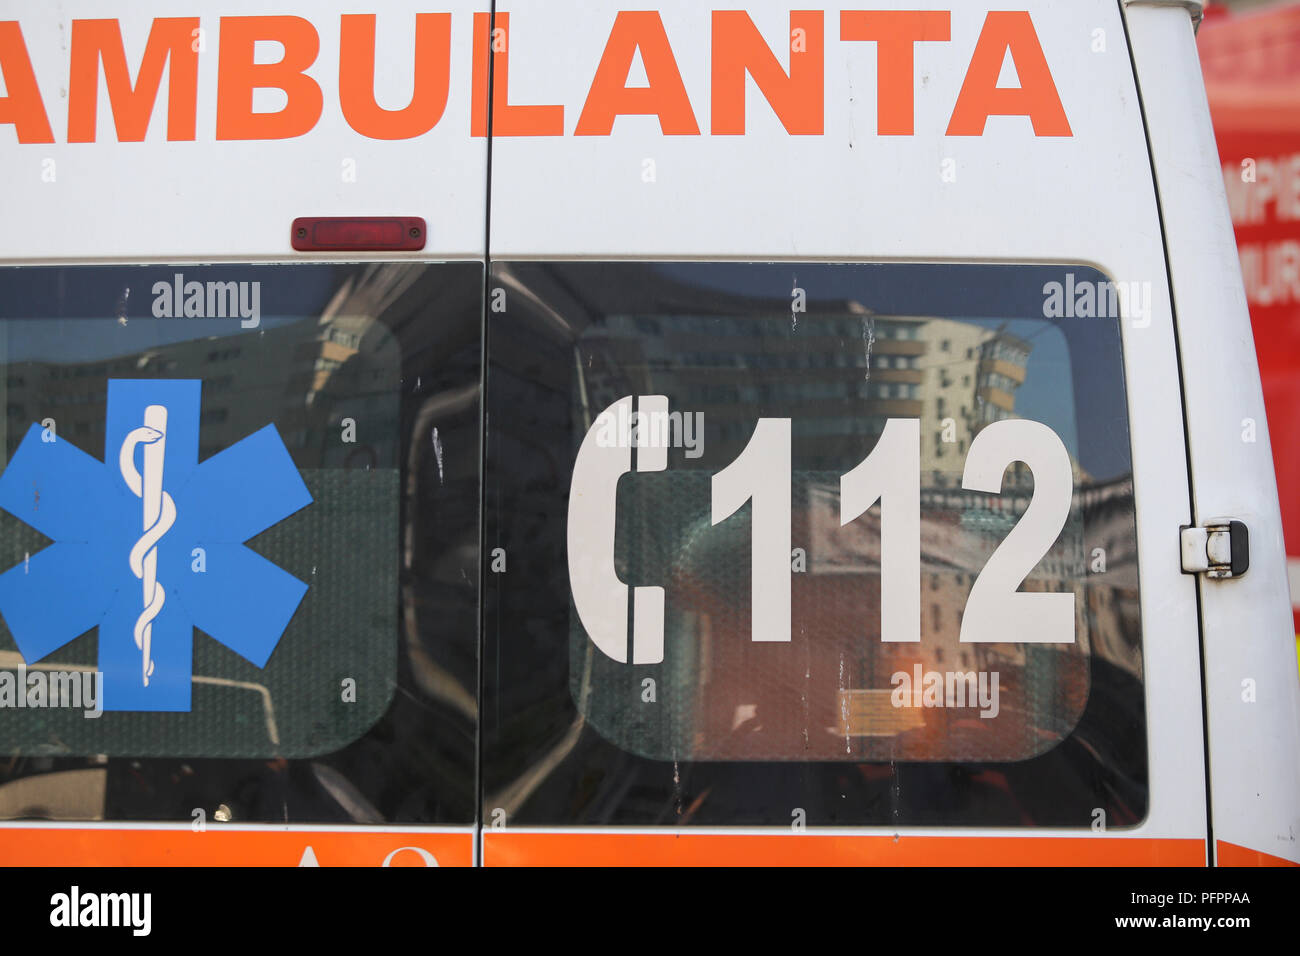 BUCHAREST, ROMANIA - August 13, 2018: Details of a Romanian ambulance at Floreasca Emergency Hospital Stock Photo